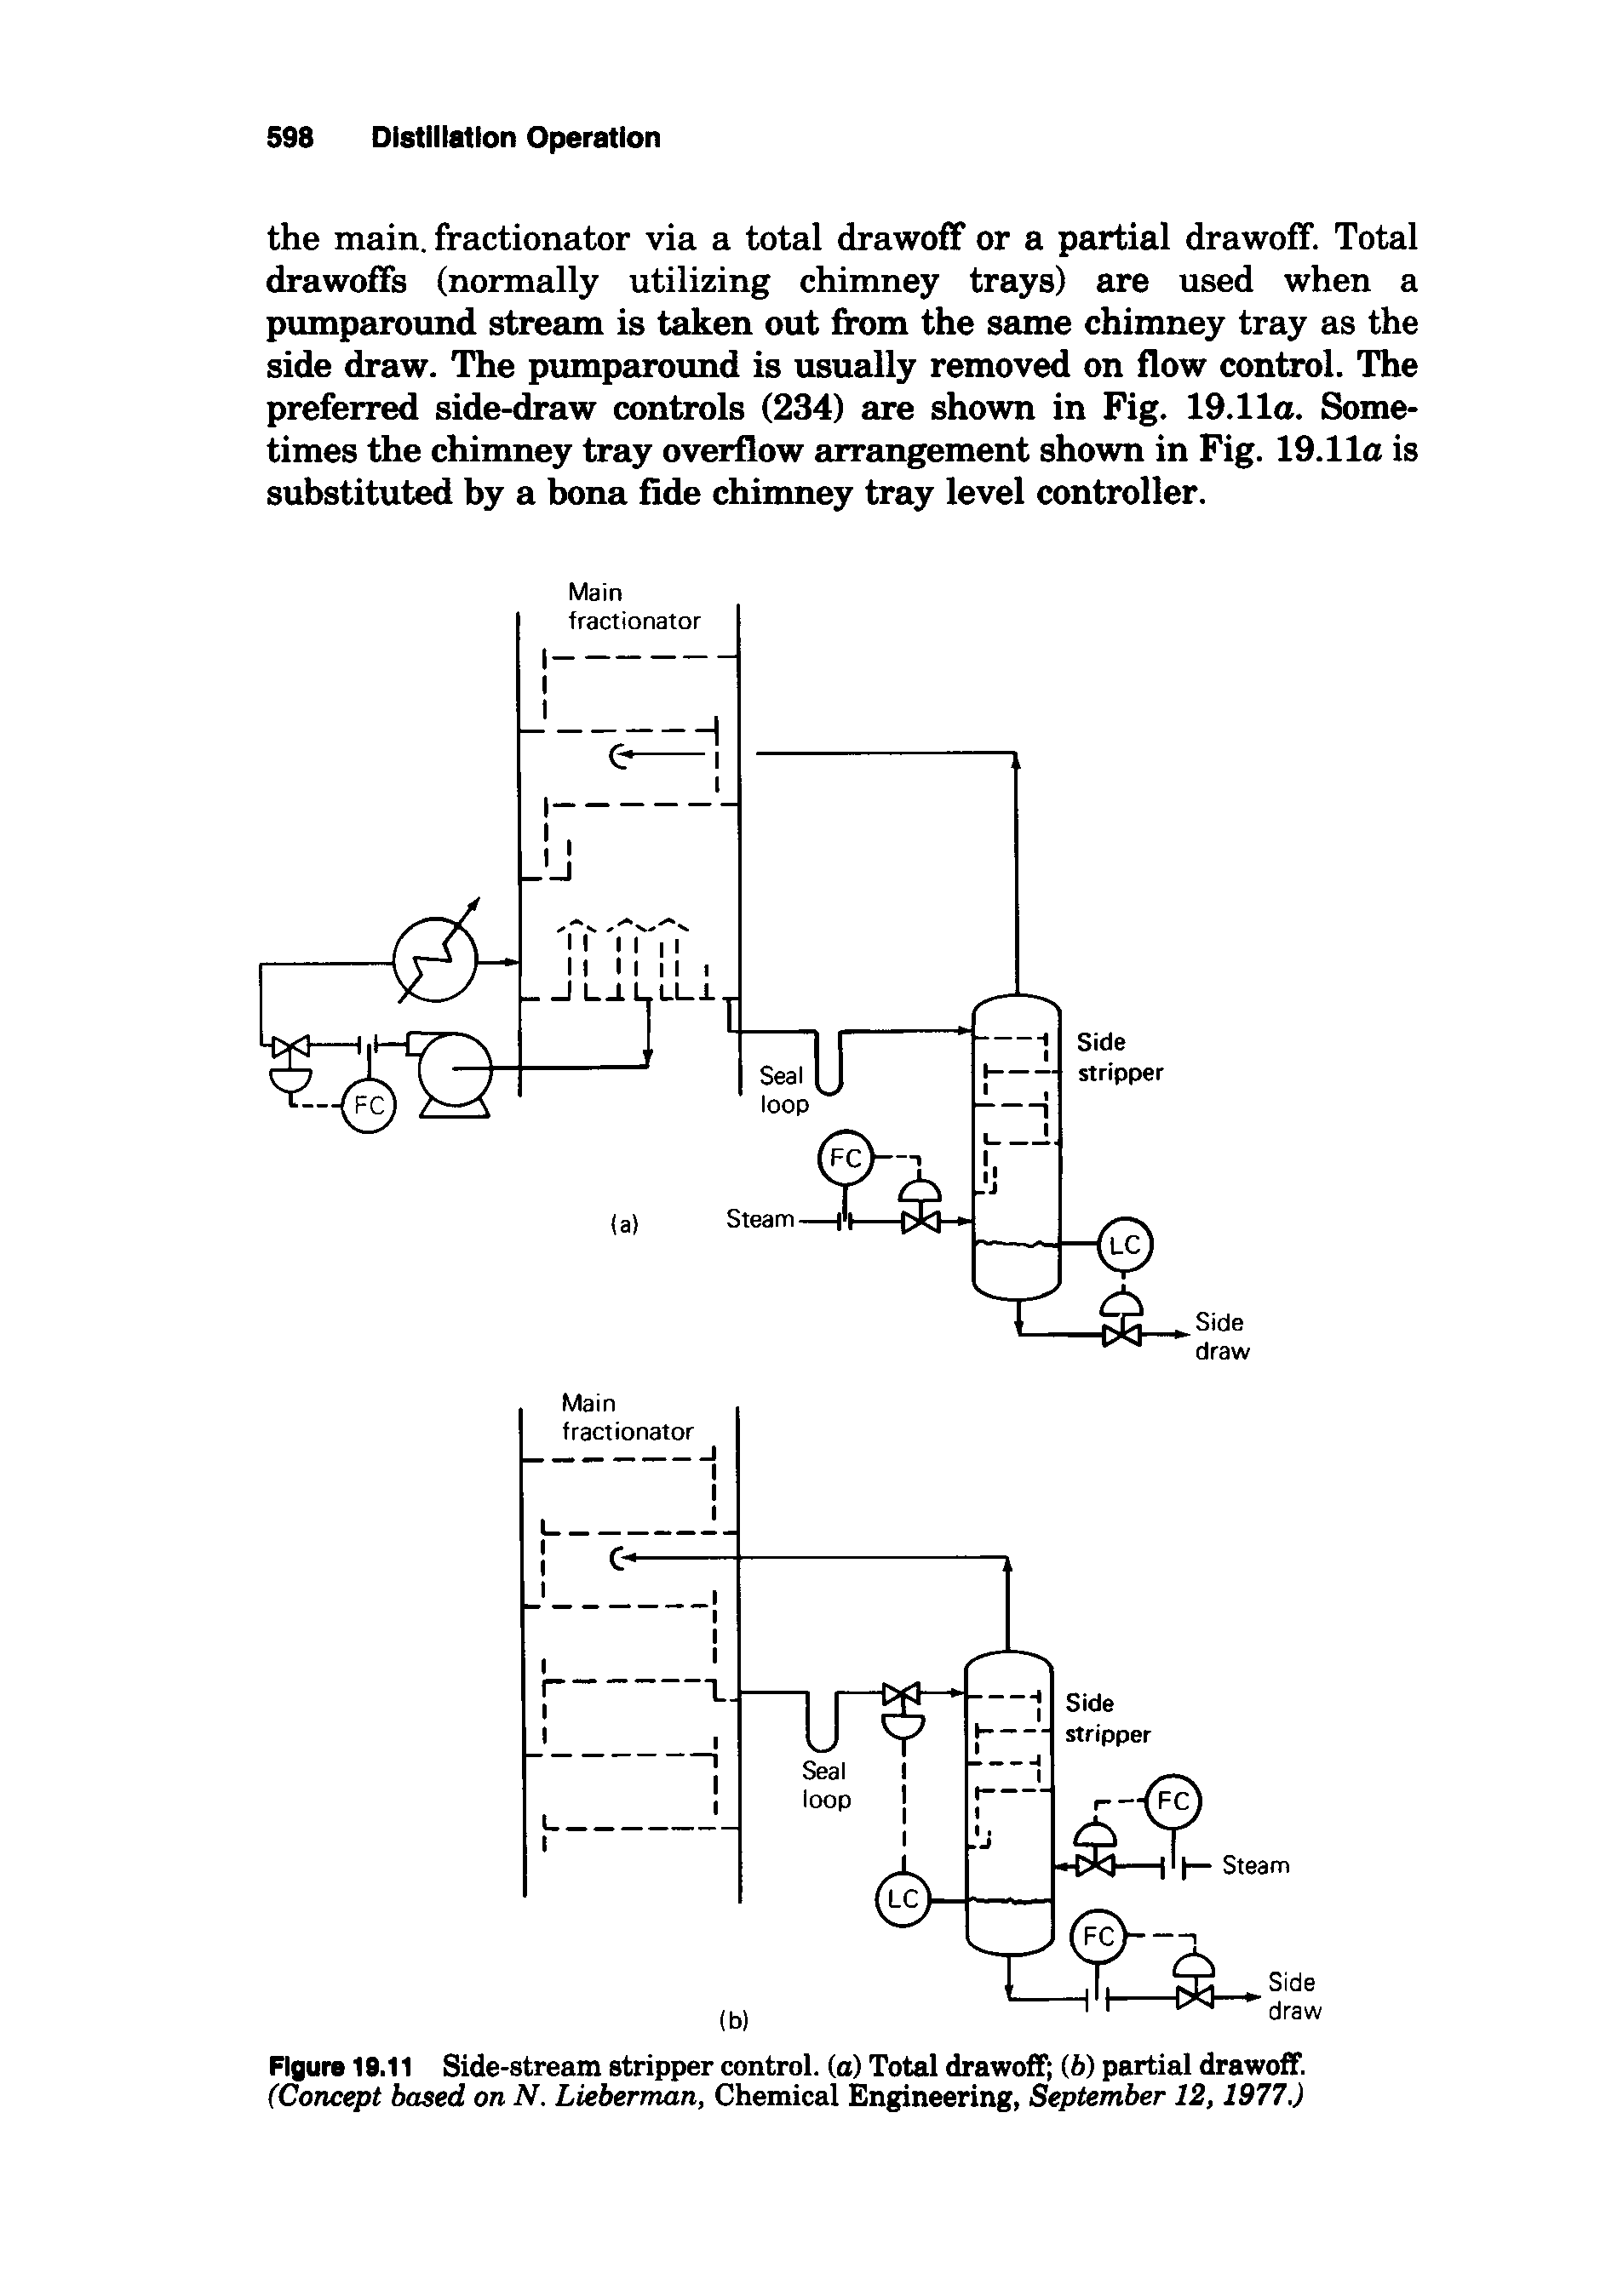 Figure 19.11 Side-stream stripper control, (a) Total drawoff (6) partial drawoff. (Concept based on N. Lieberman, Chemical Engineering, September 12,1977.)...